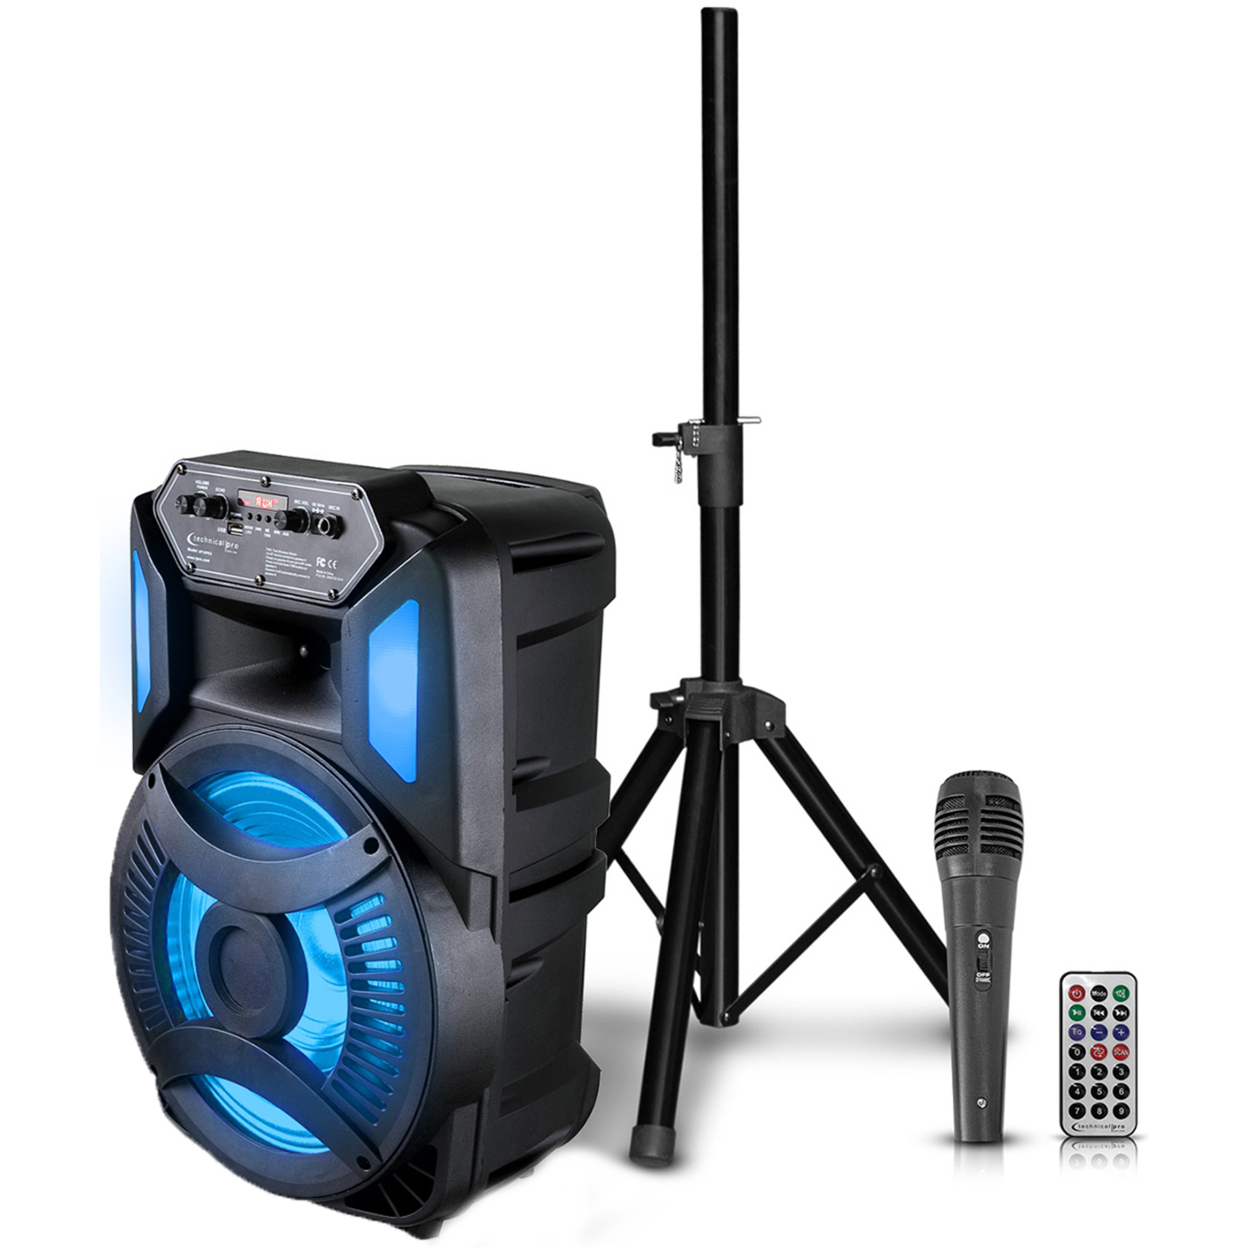 Technical Pro Rechargeable 1200 Watts 12 Bluetooth LED Speaker W/ FM Radio, LED Woofer, SD/USB Inputs, Wired Mic And Remote Included